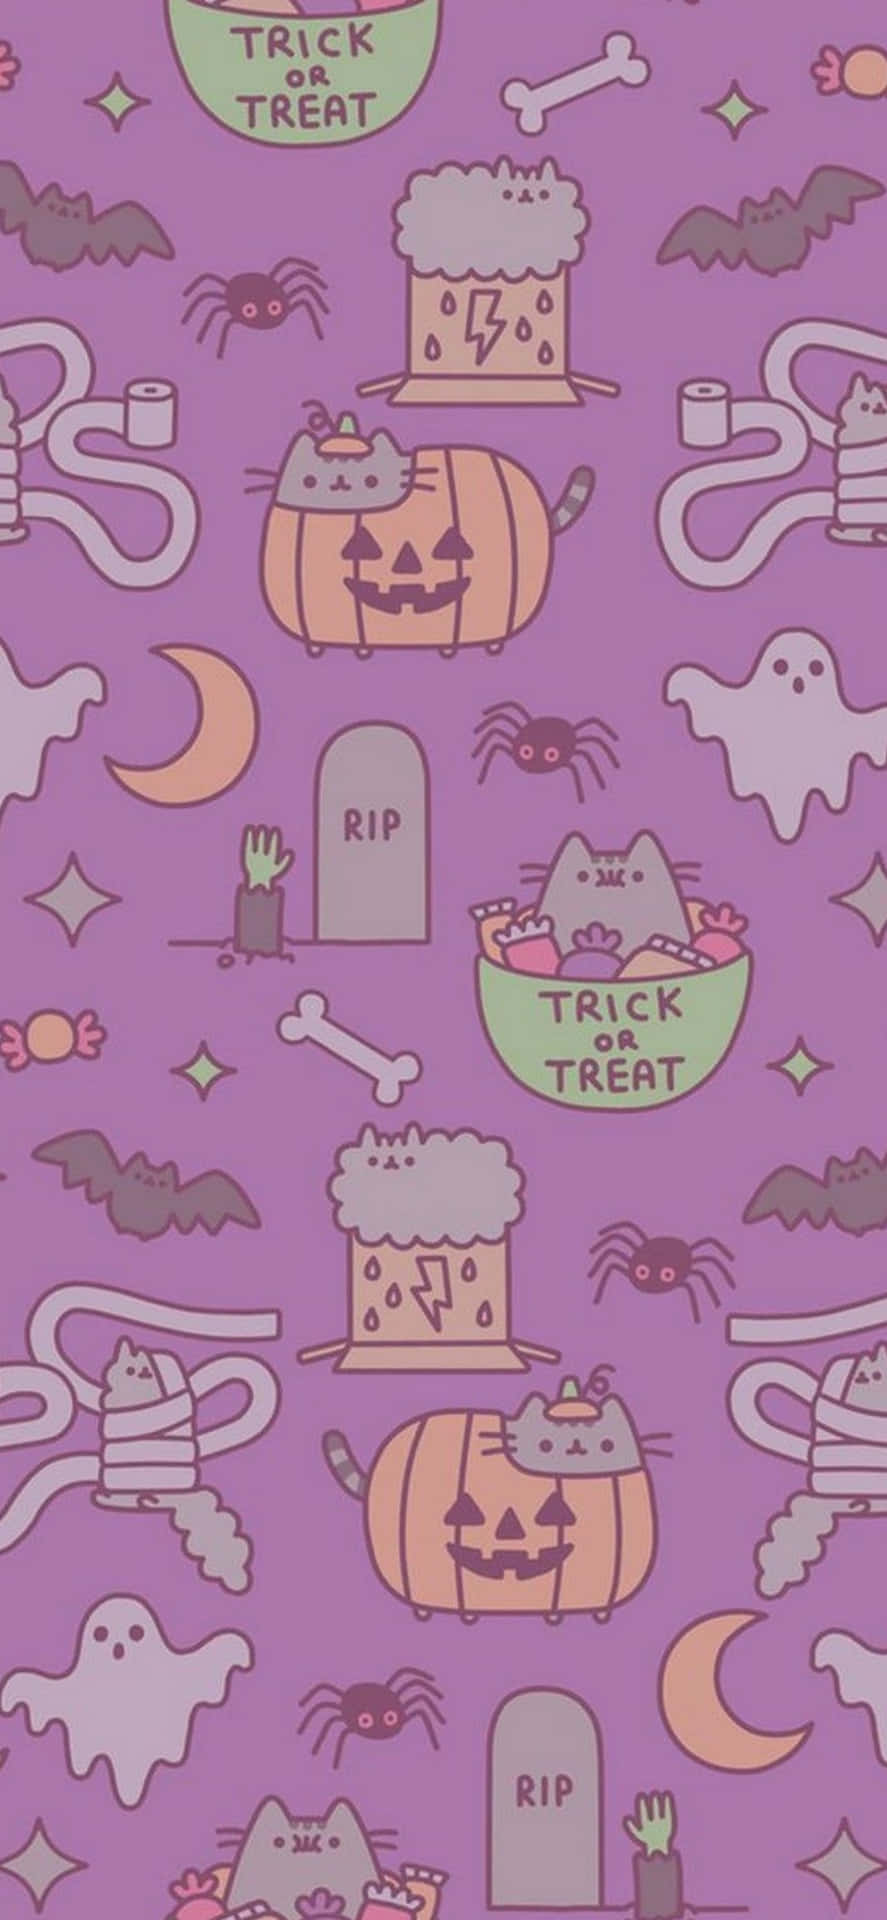 Get spooky and show your Halloween spirit with this fun iPhone wallpaper!